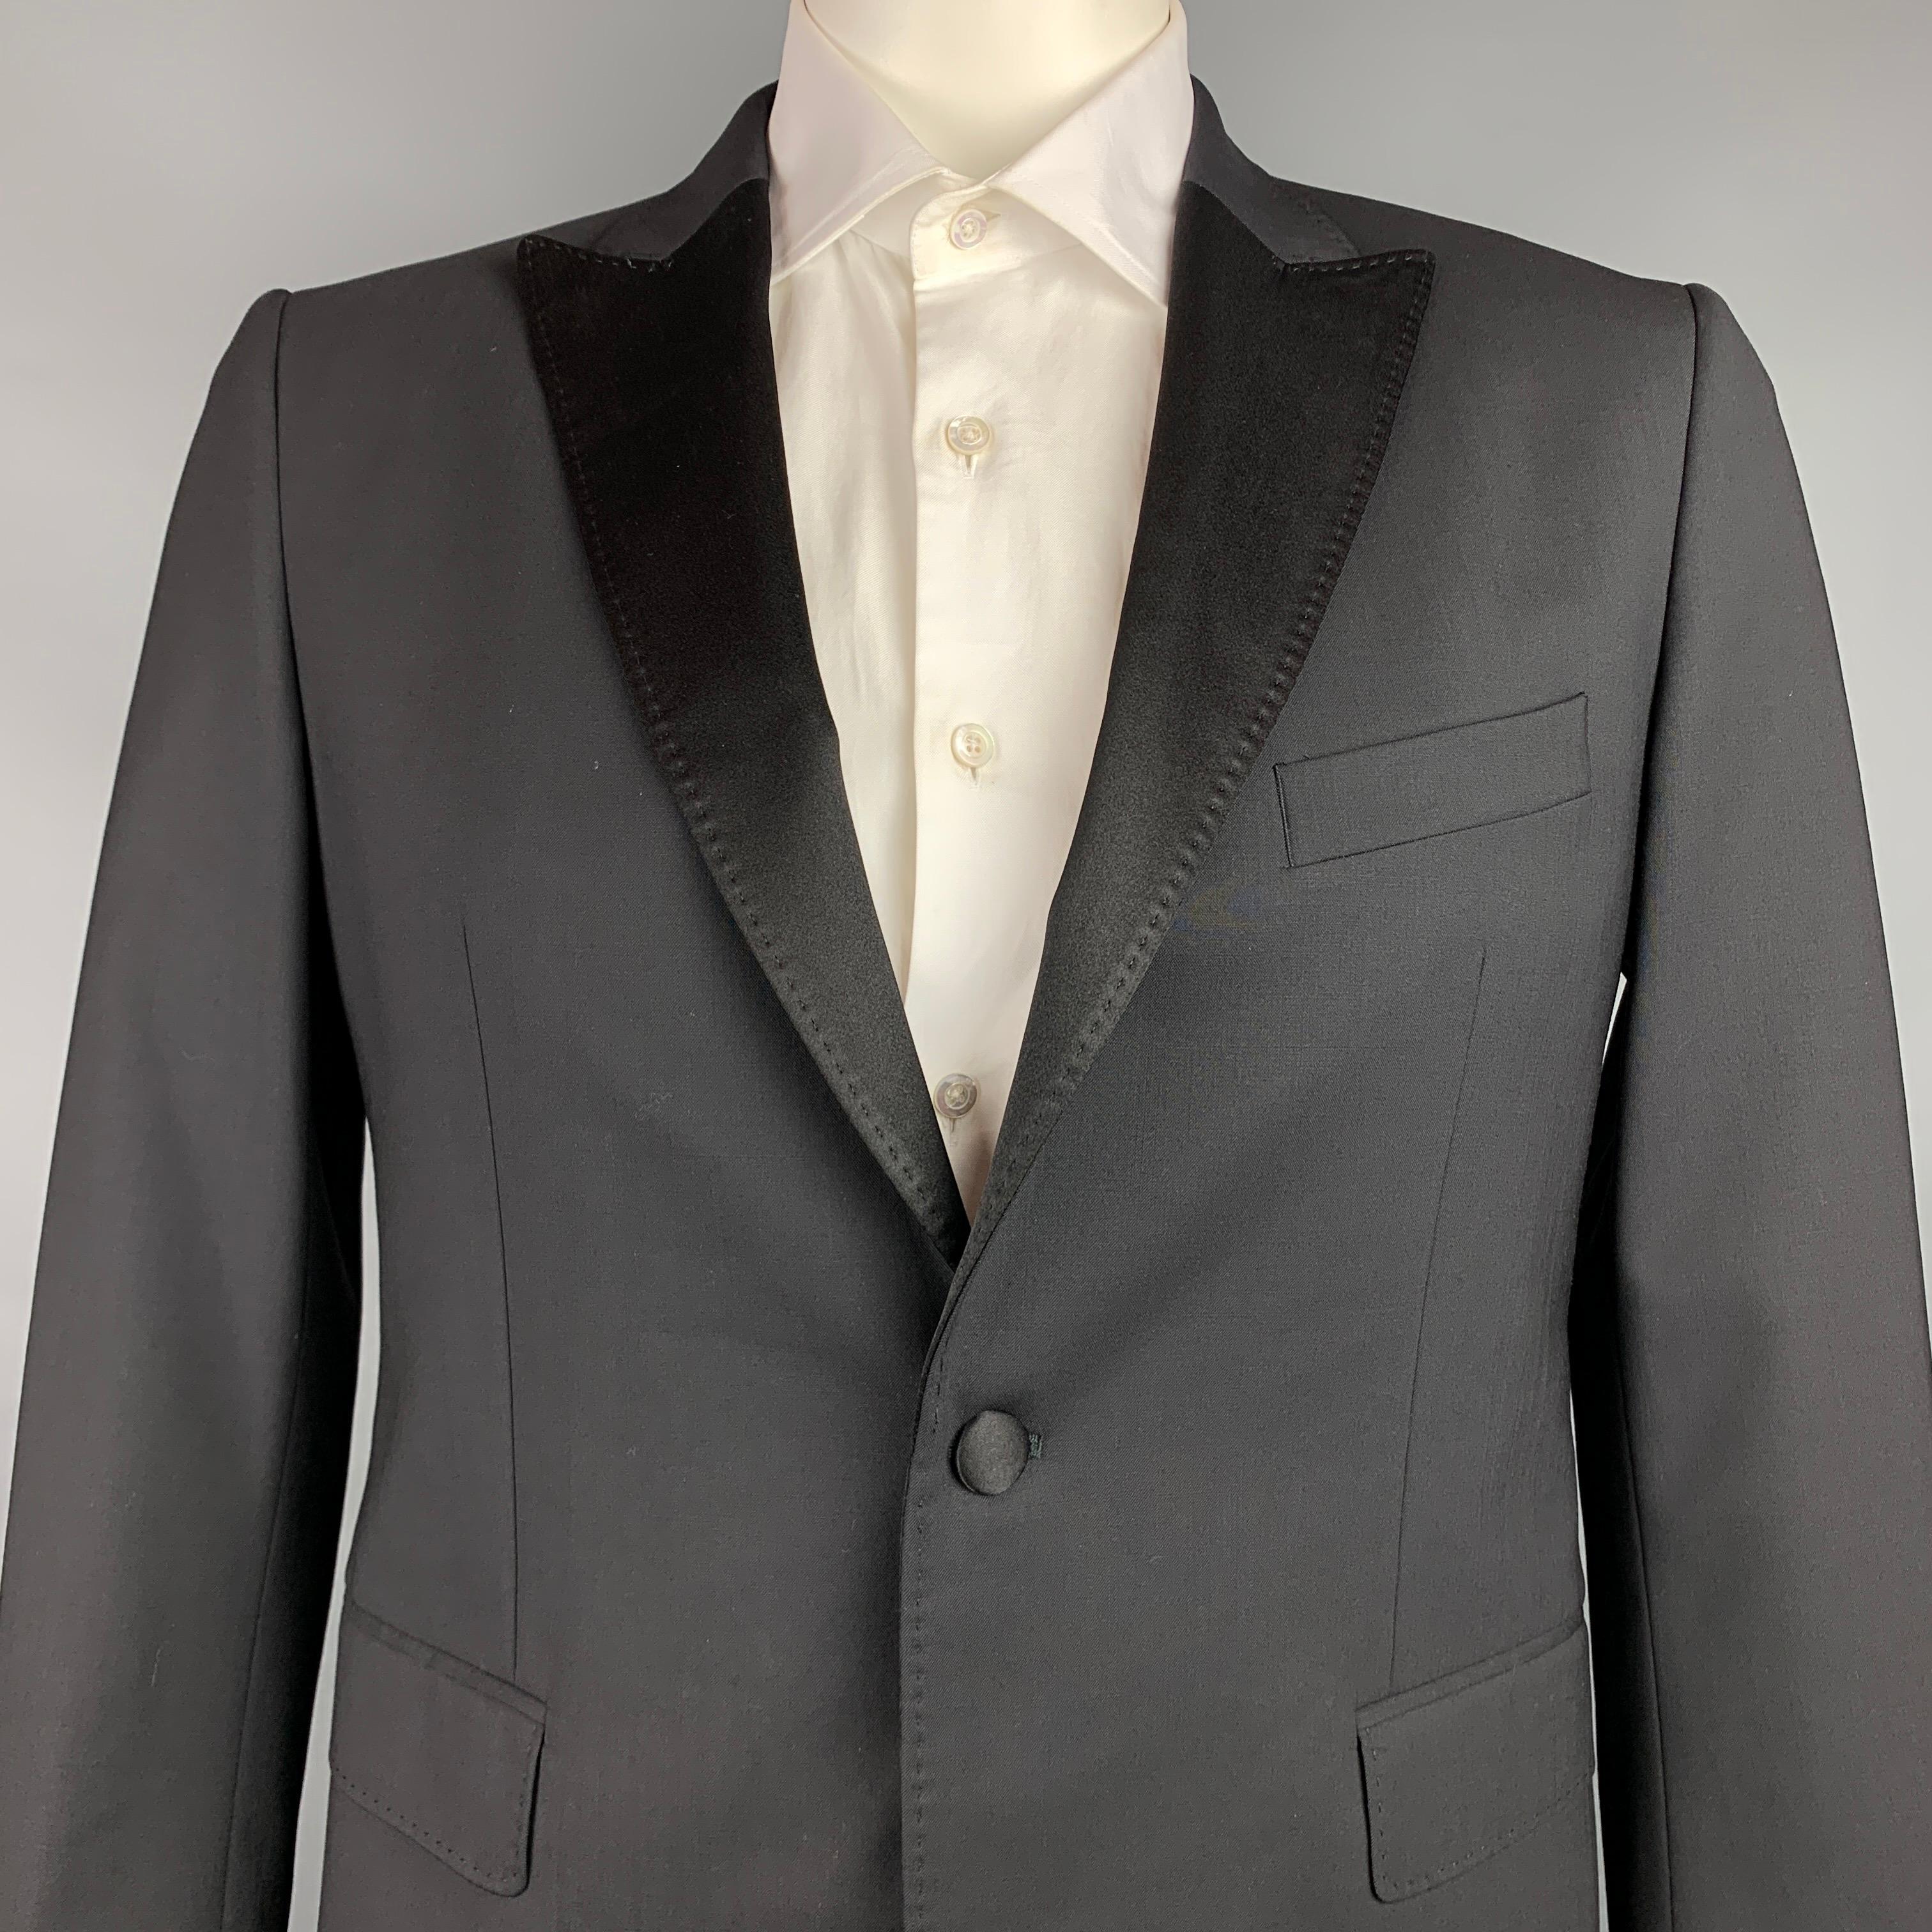 JOHN RICHMOND sport coat comes in a black wool with a full liner featuring a peak lapel, flap pockets, beaded back design, and a single button closure. Made in USA.

Very Good Pre-Owned Condition.
Marked: 52

Measurements:

Shoulder: 18 in.
Chest: